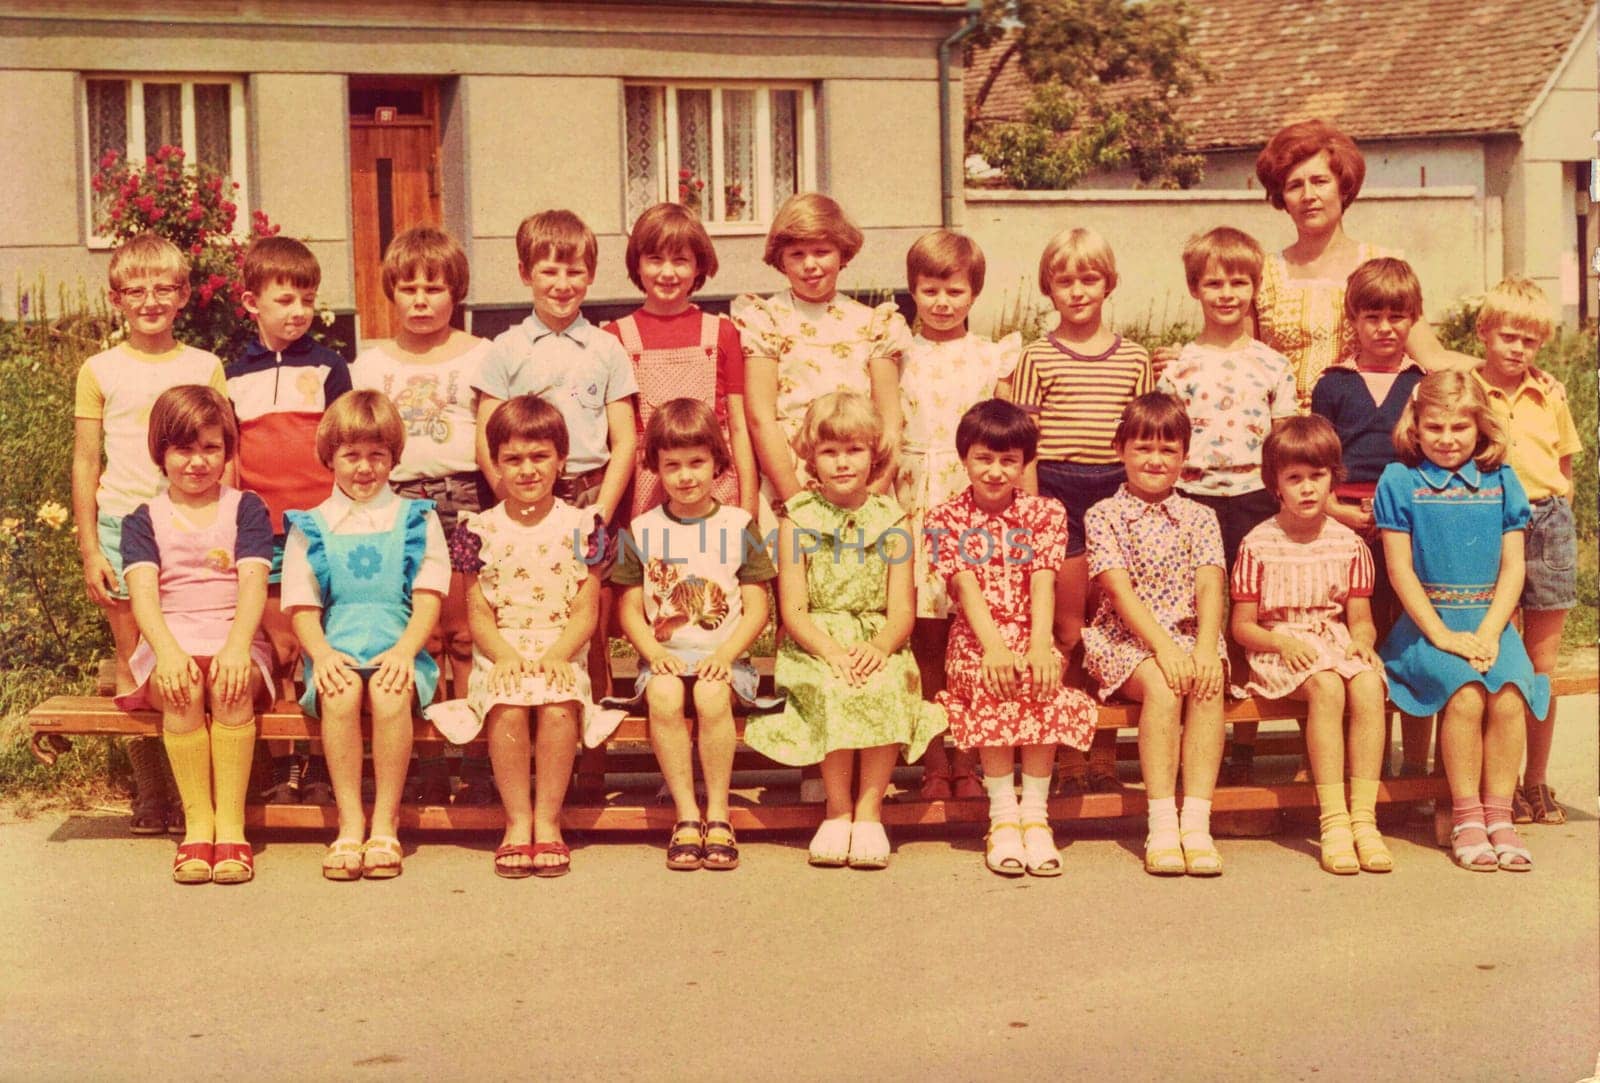 Retro photo shows pupils outdoors. They pose for a group photography by roman_nerud